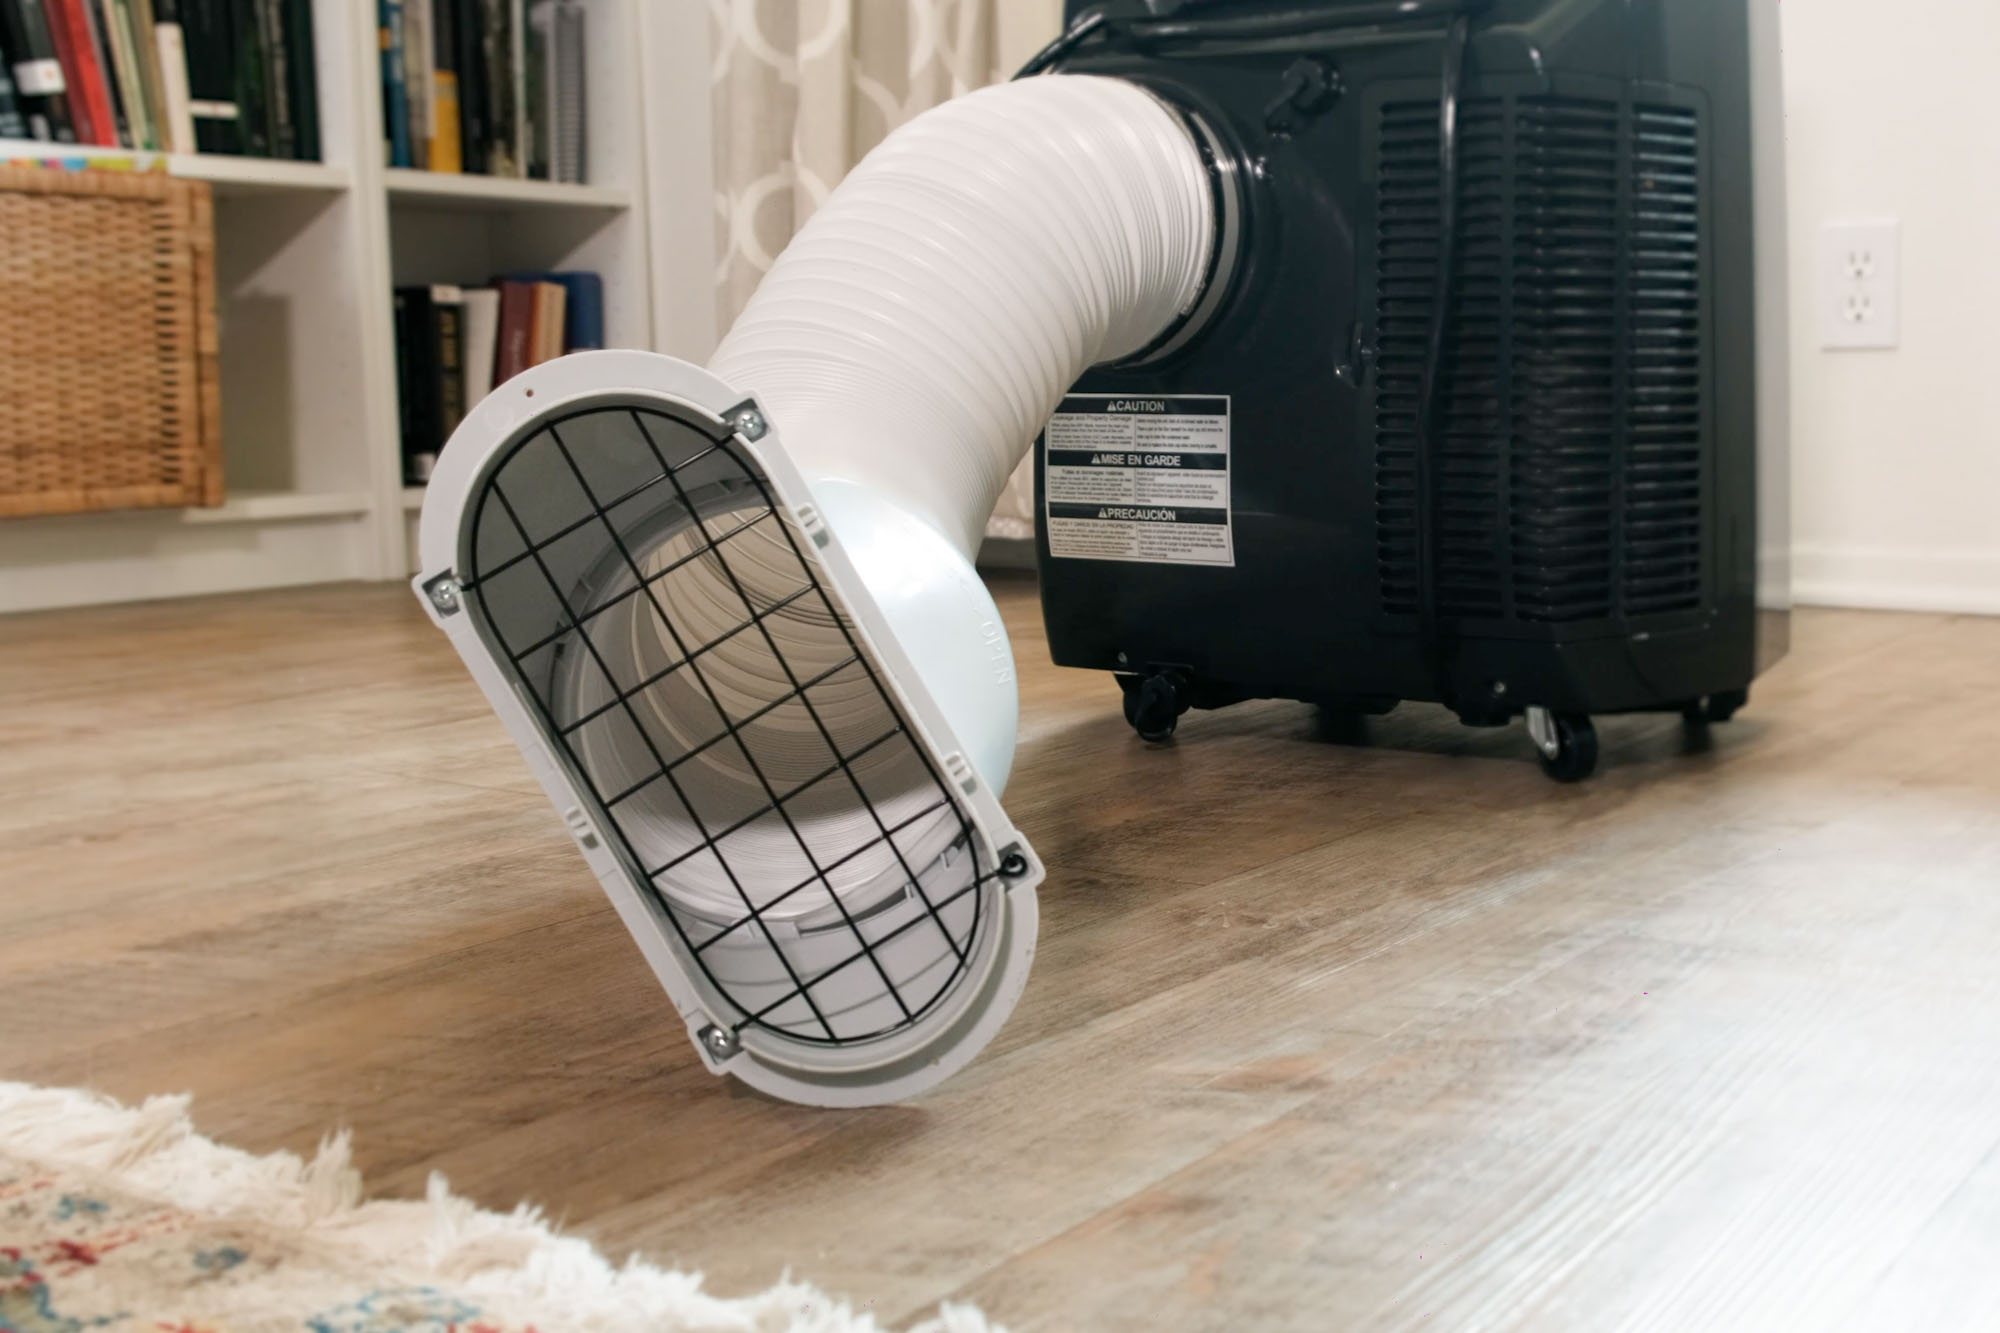 How To A Portable AC That's Not Cooling (Not Blowing Cold Air)